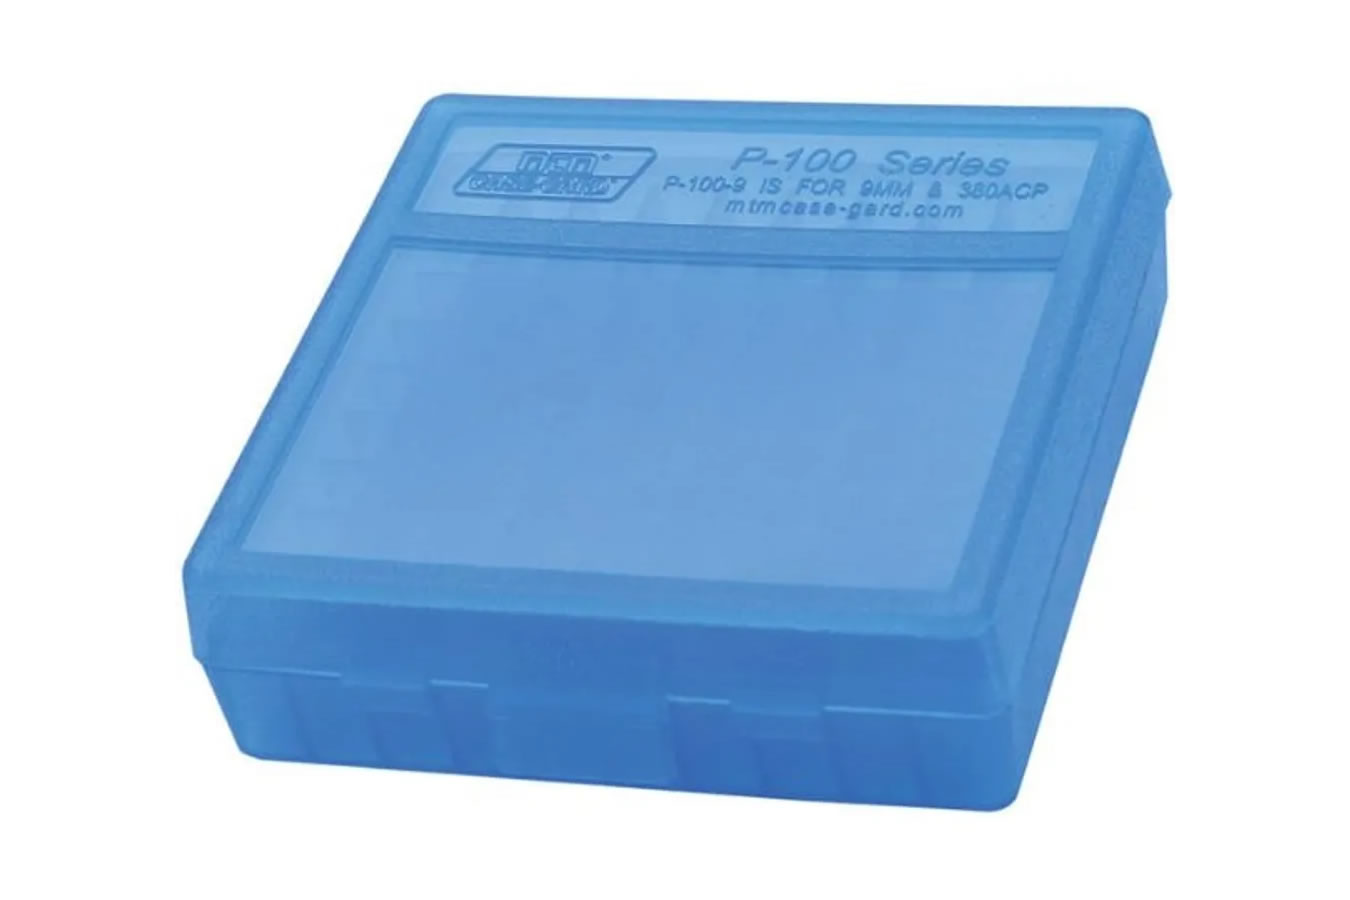 MTM PLASTIC AMMO BOXES BLUE 100 Round 9mm / 380 5 FREE SHIPPING 